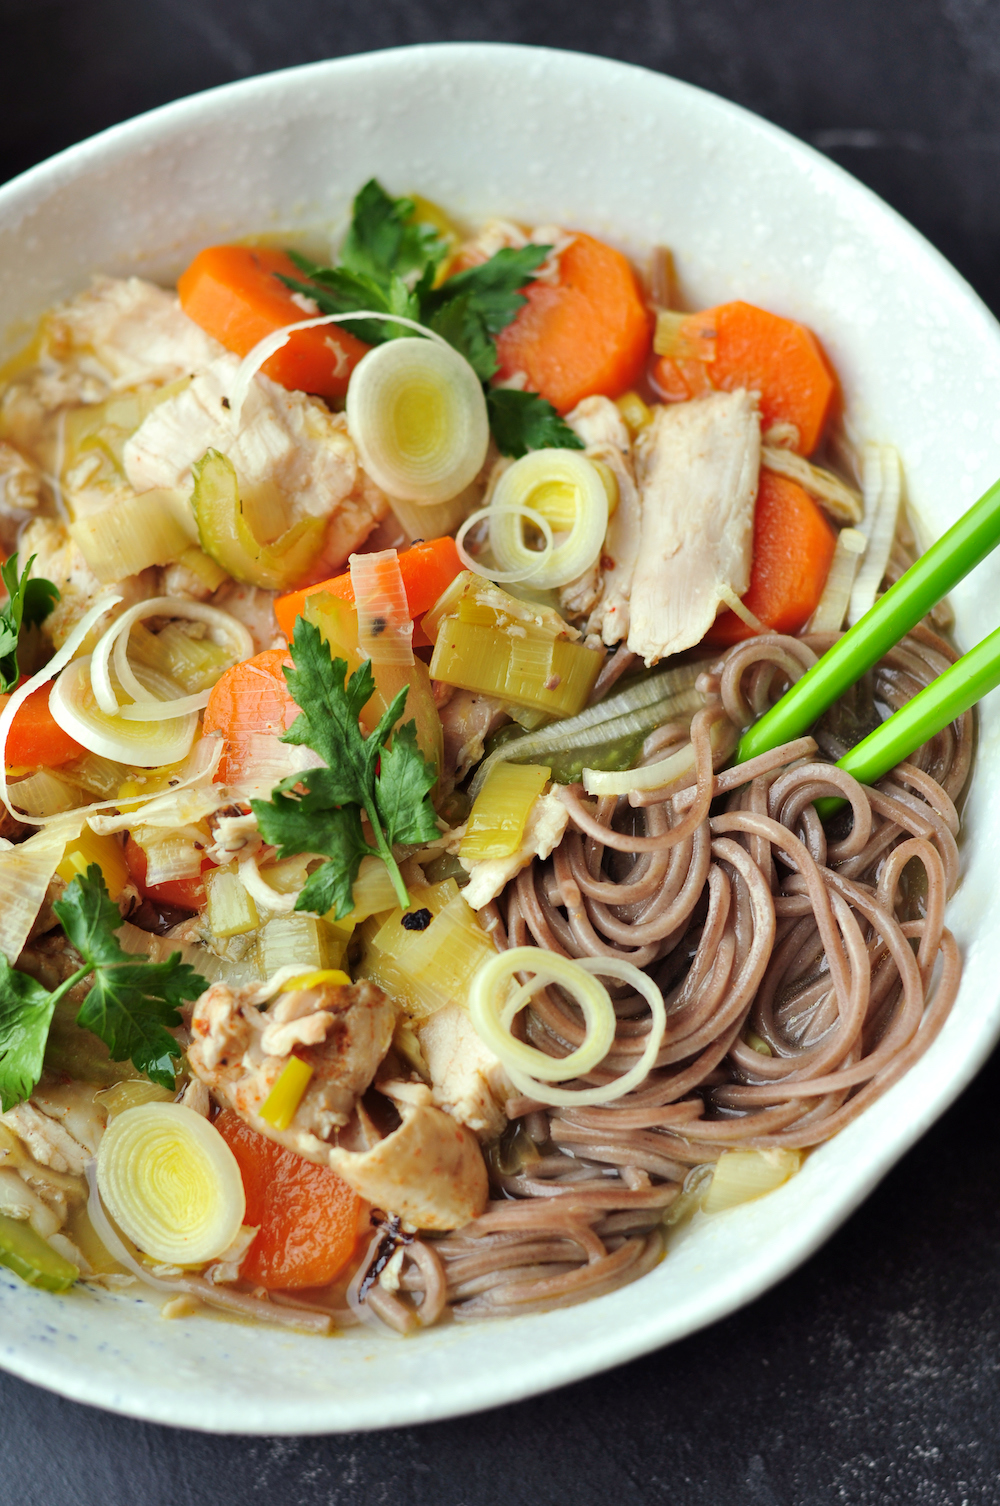 Chicken Leek Soup with Soba Noodles